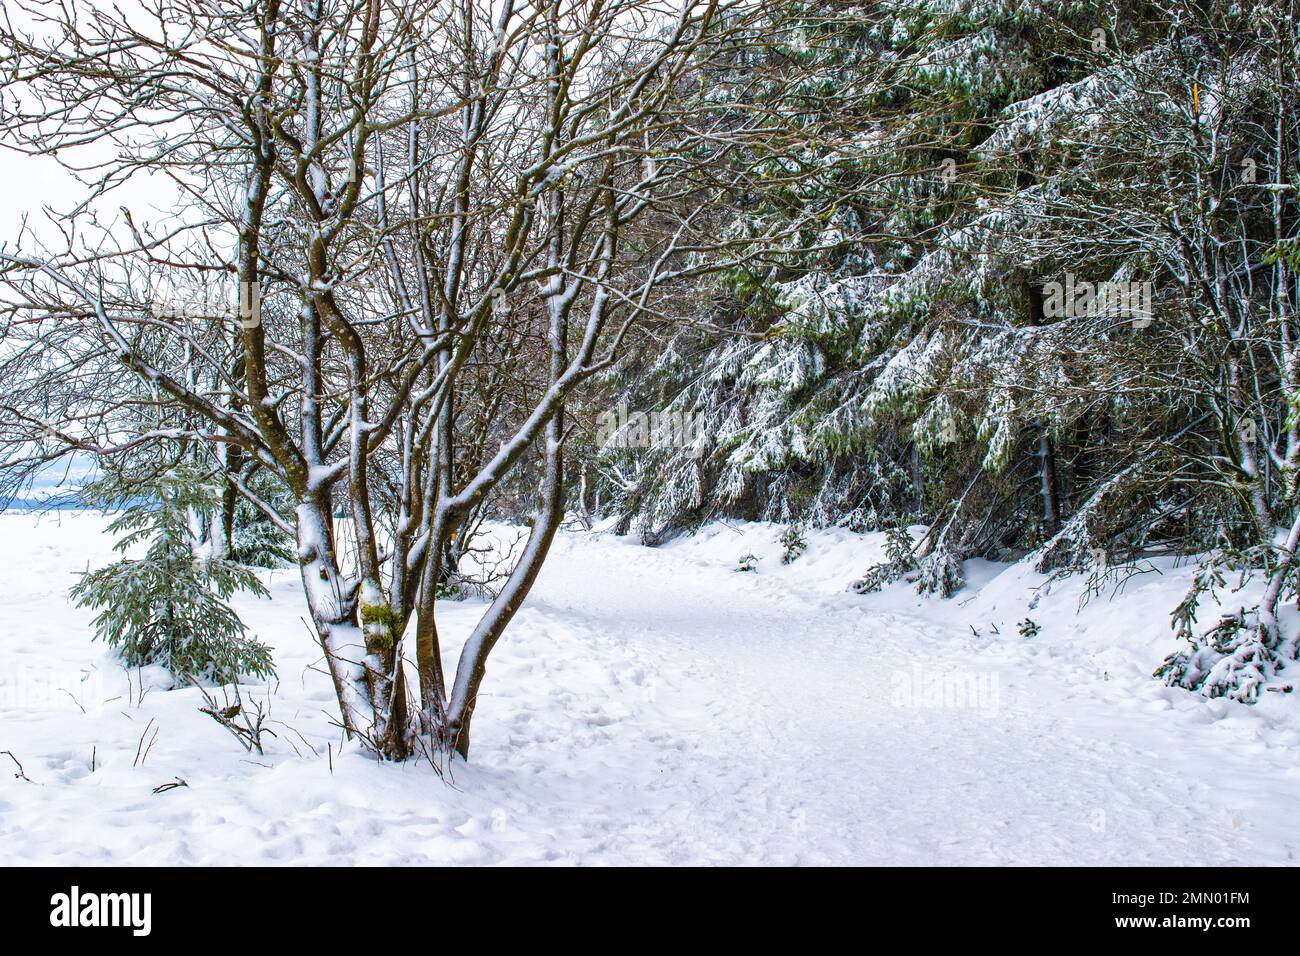 Snowy trees and path in the forest. Stock Photo